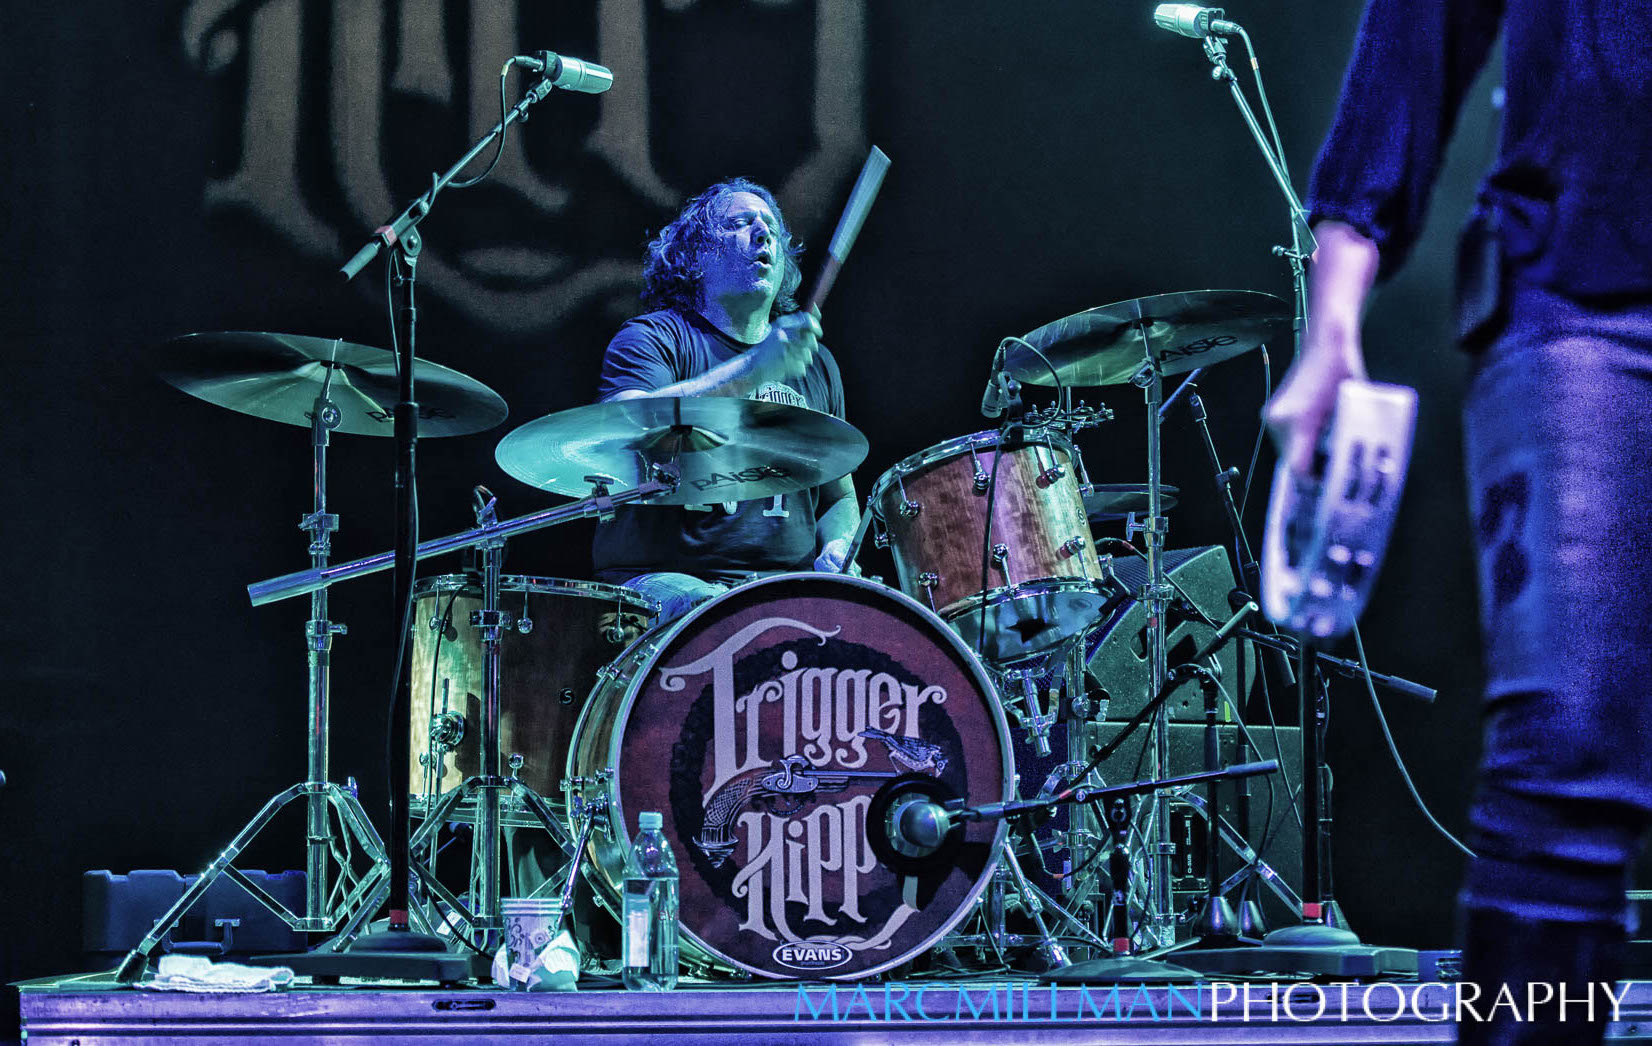 Interview: Steve Gorman on the Old Black Crowes and the New Trigger Hippy